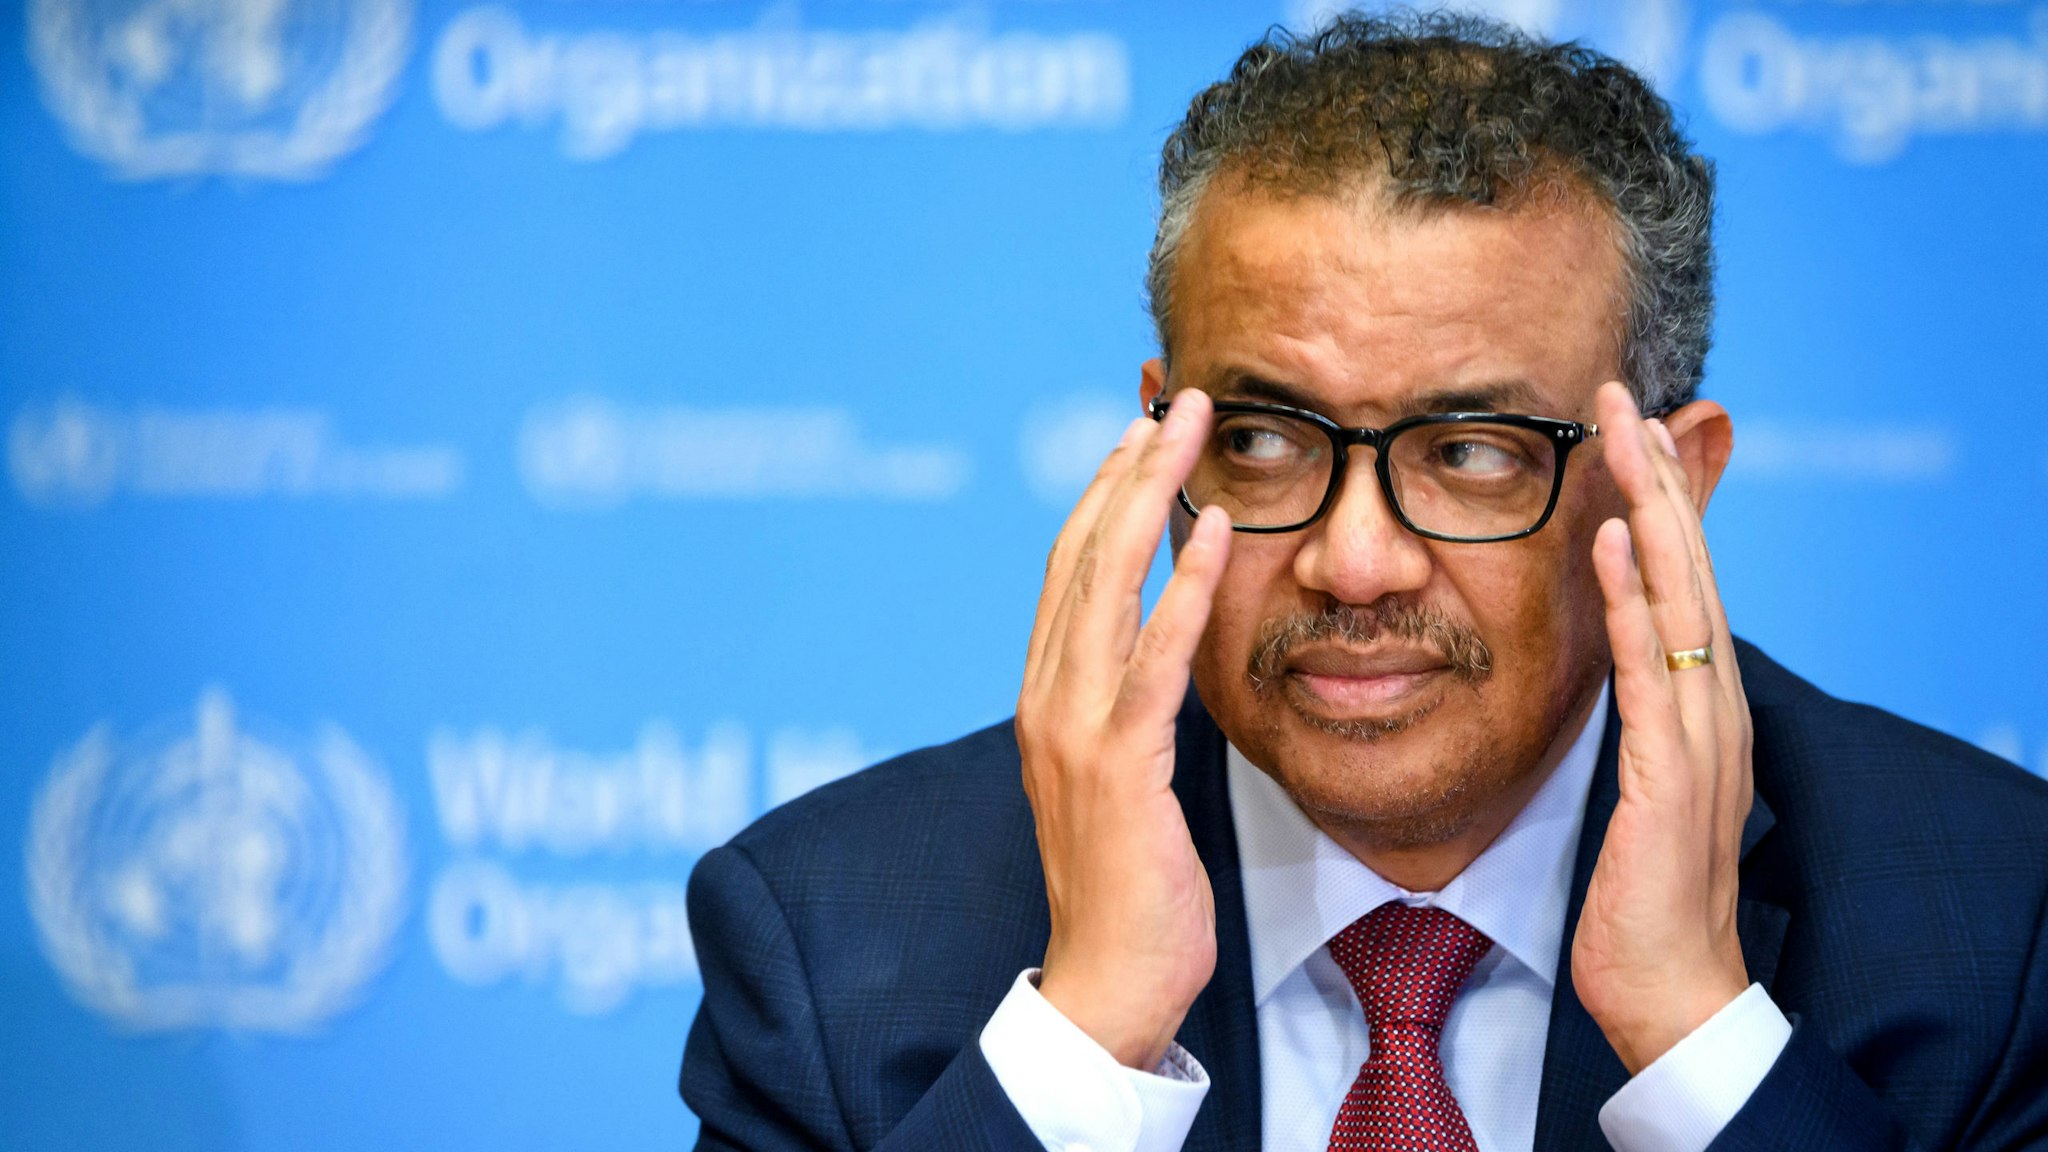 World Health Organization (WHO) Director-General Tedros Adhanom Ghebreyesus gestures during a daily press briefing on COVID-19 coronavirus at the WHO headquaters on March 6, 2020 in Geneva.